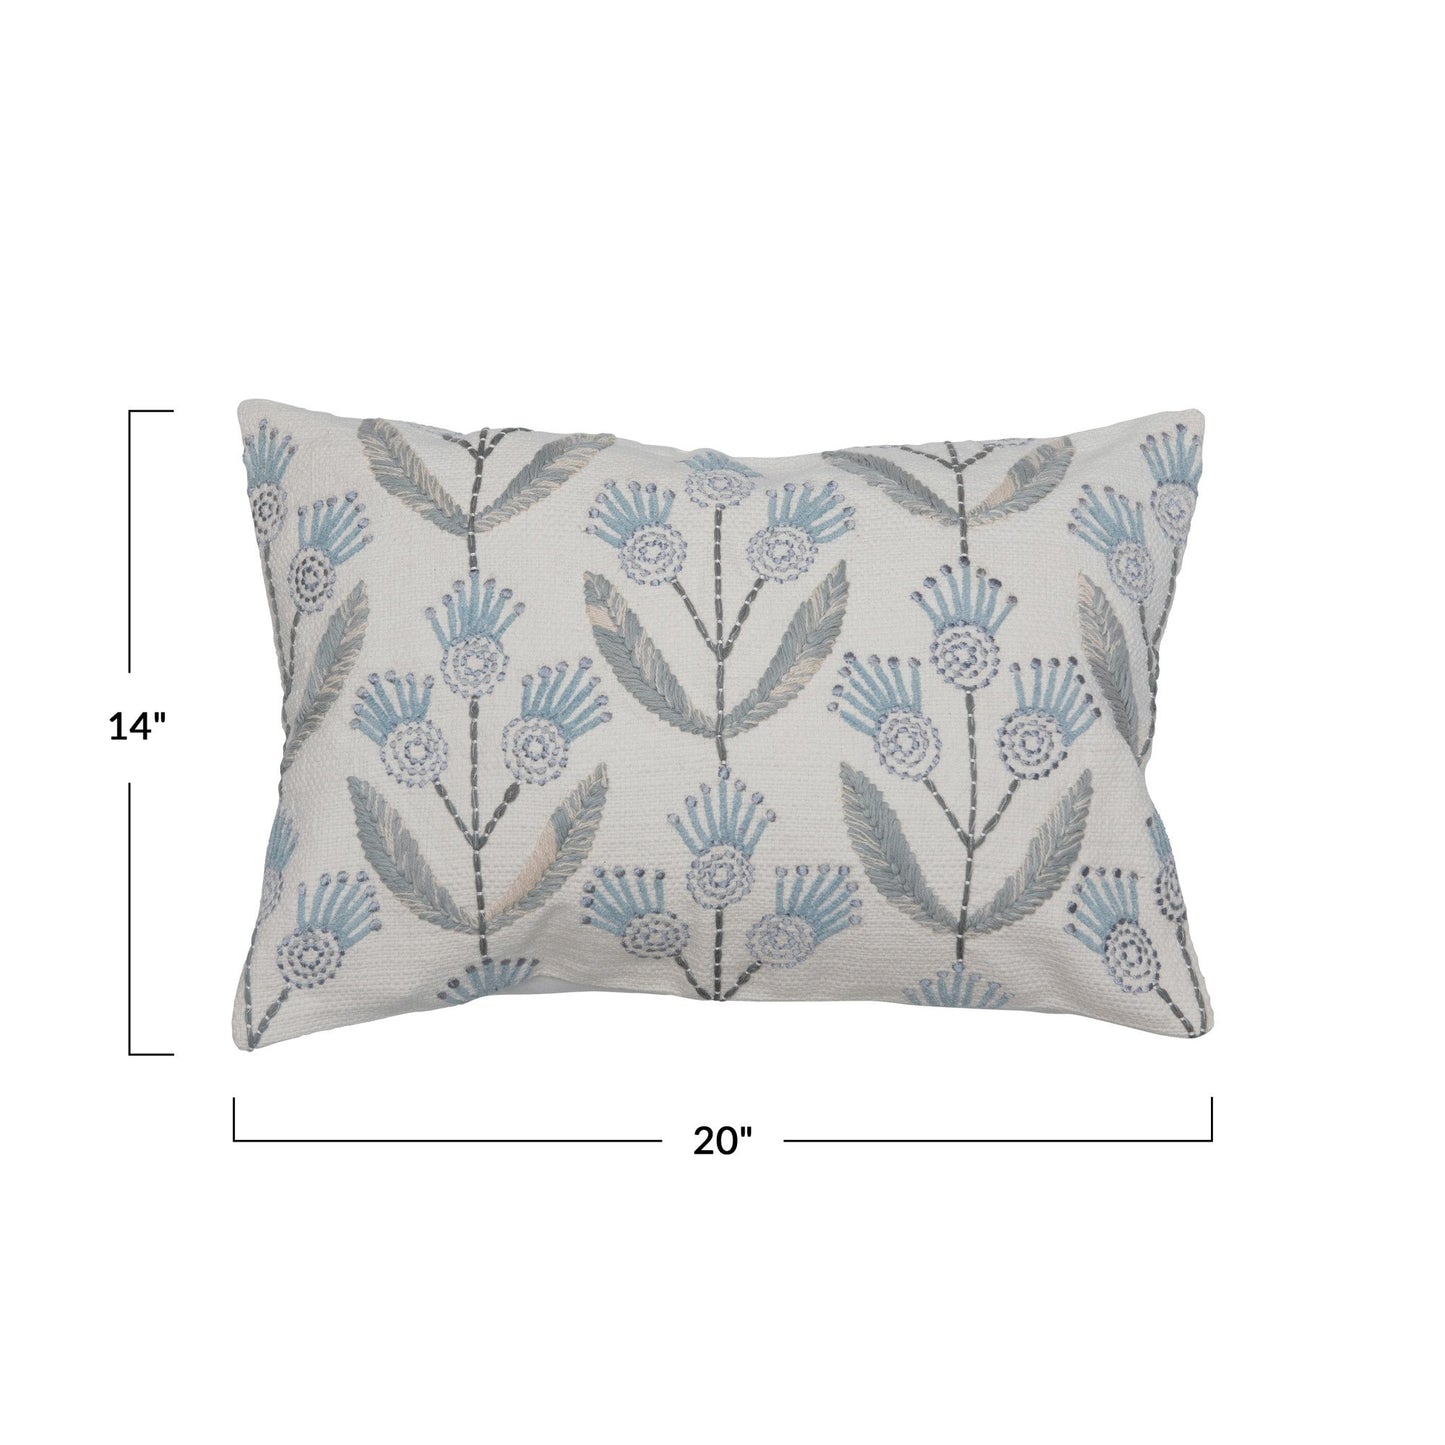 Cotton Lumbar Pillow with Floral Embroidery